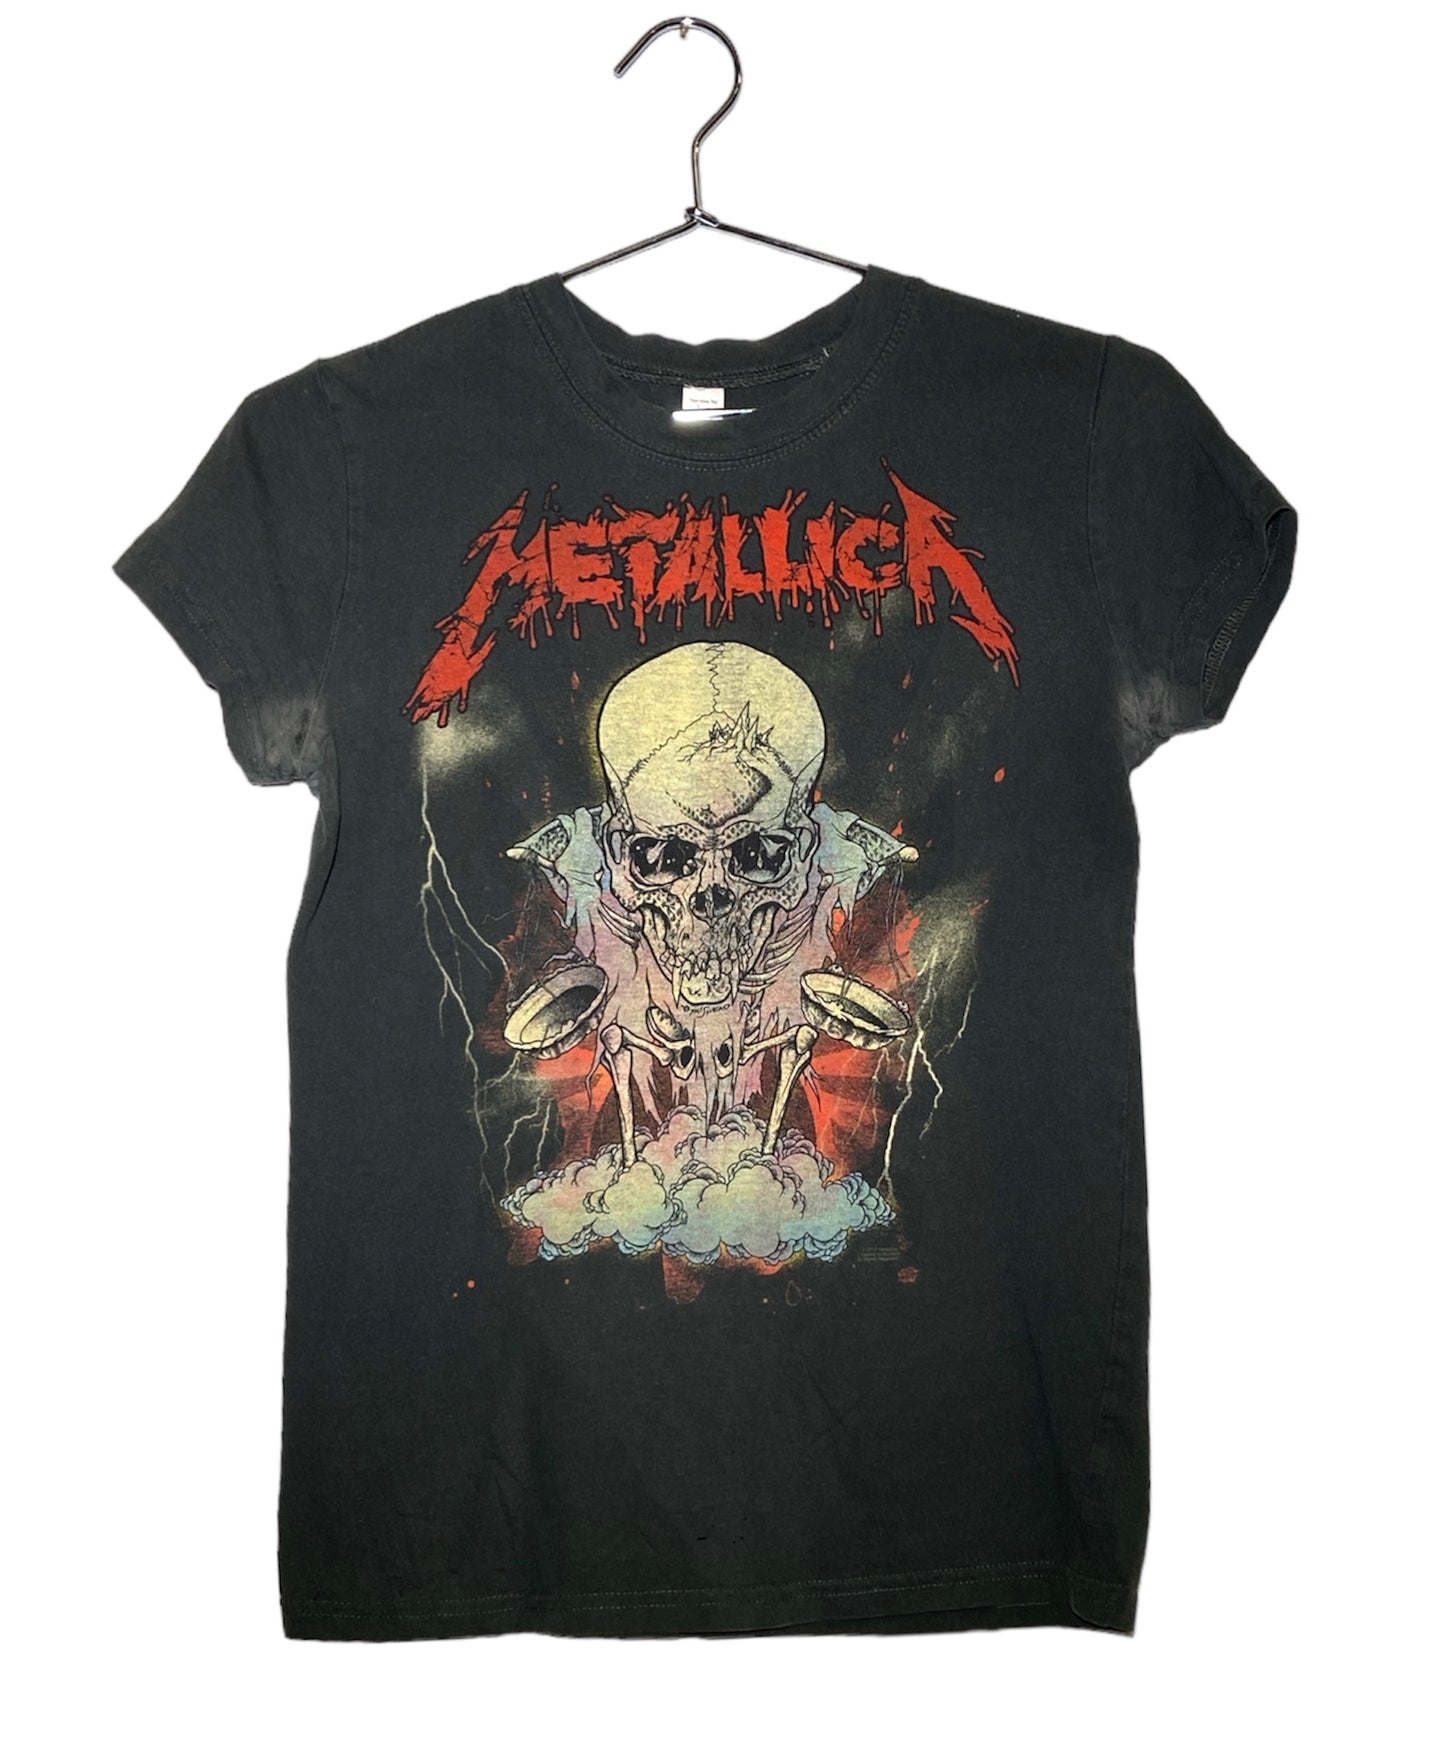 2010 Metallica Skull and Drums Shirt